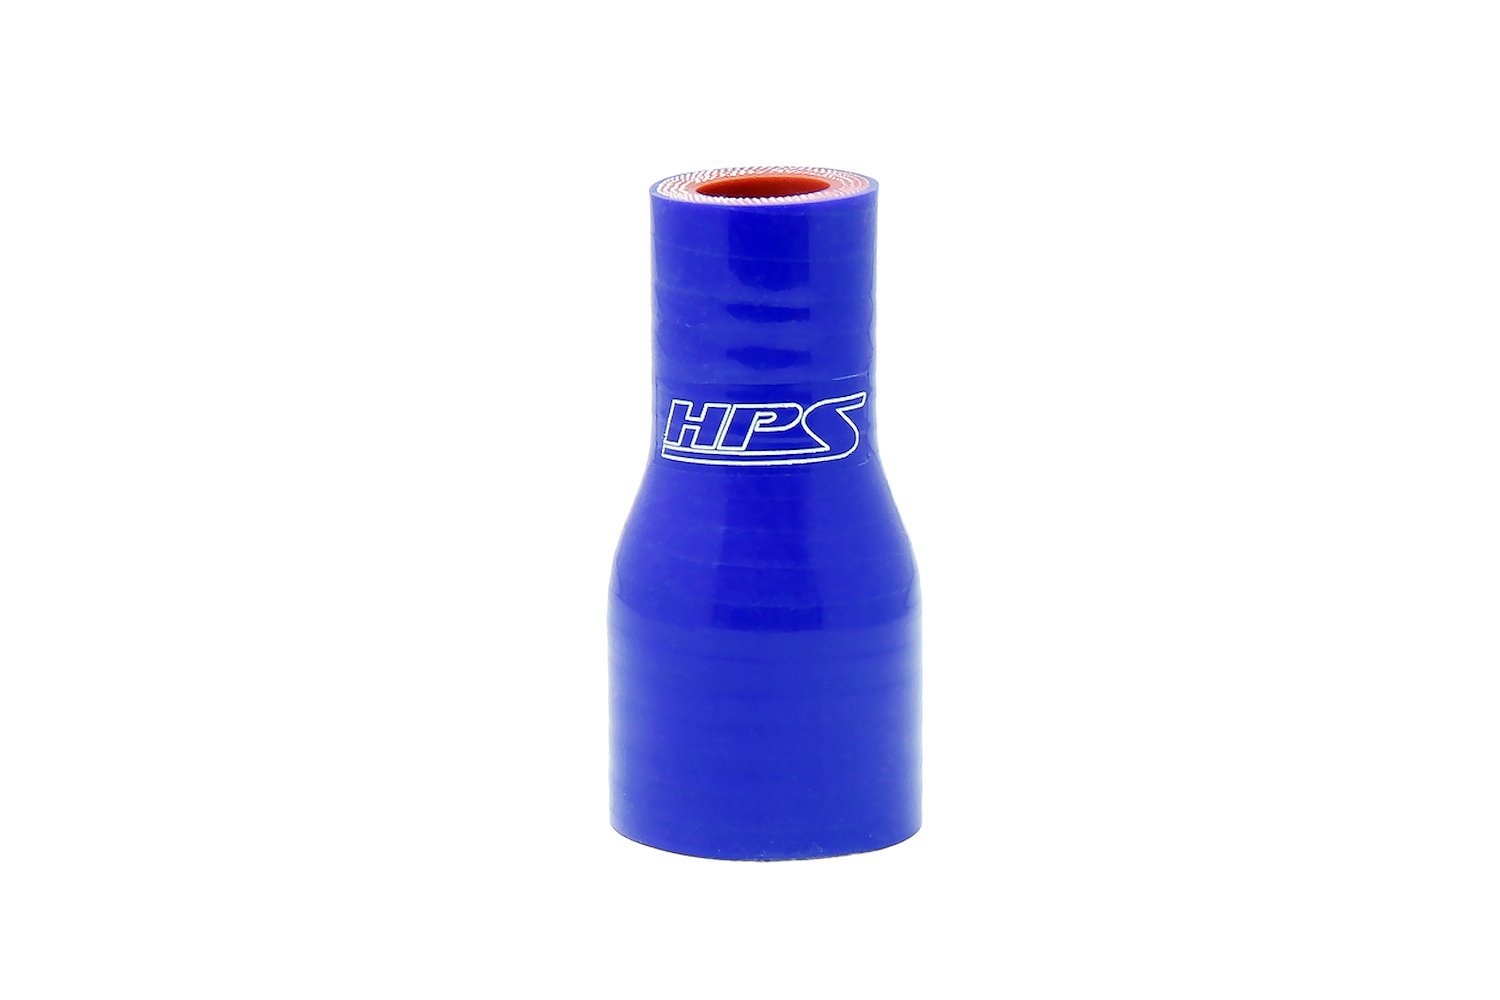 HTSR-138-200-L4-BLUE Silicone Reducer Hose, High-Temp 4-Ply Reinforced, 1-3/8 in. - 2 in. ID, 4 in. Long, Blue